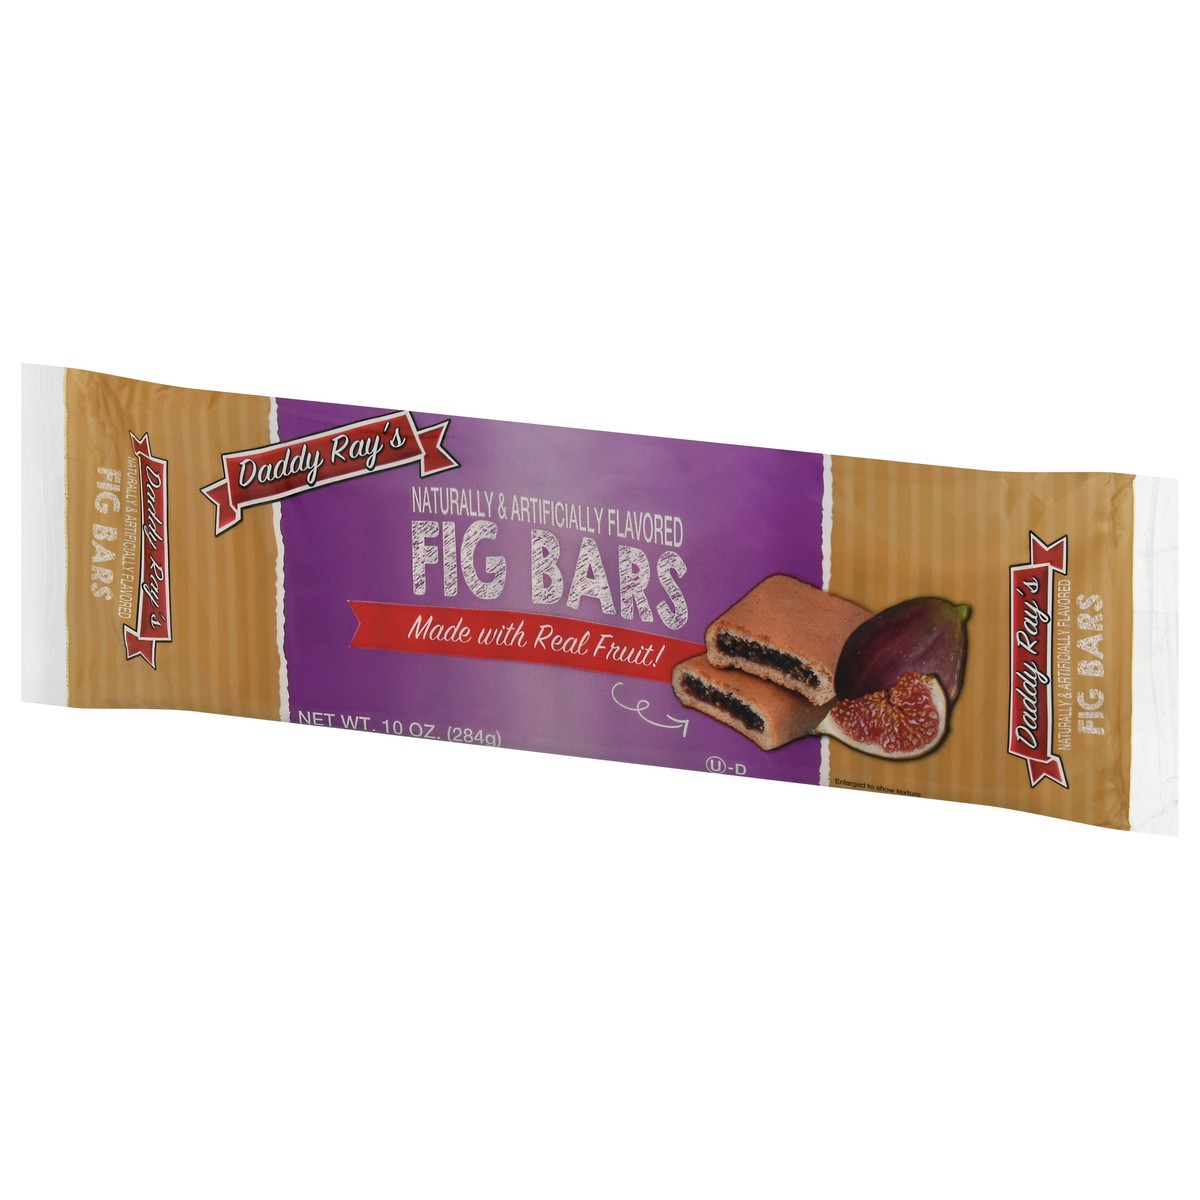 slide 9 of 14, Daddy Ray's Fig Bars 10 oz, 10 oz